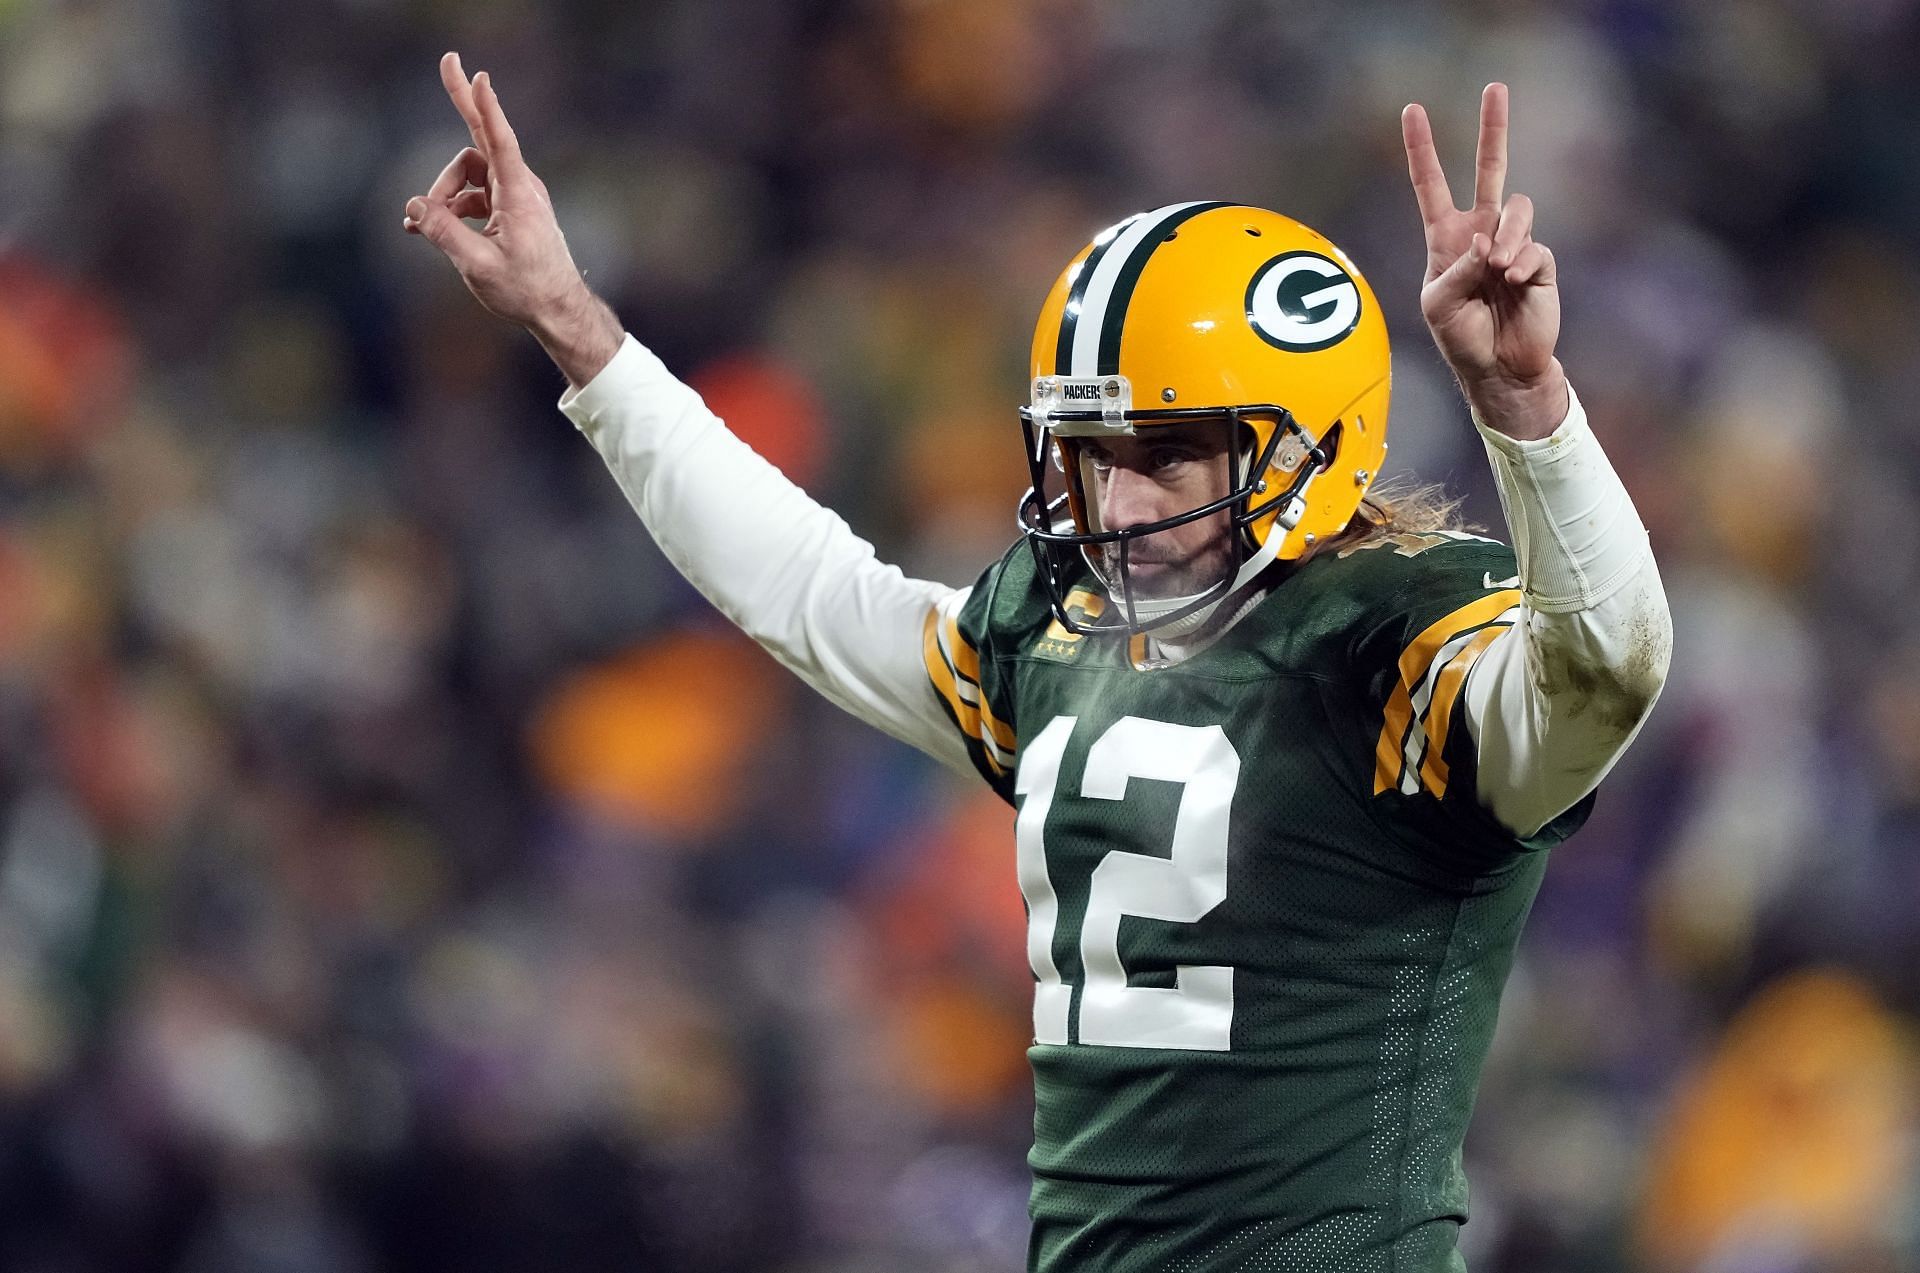 Ranking the 5 best Green Bay Packers QBs of all time